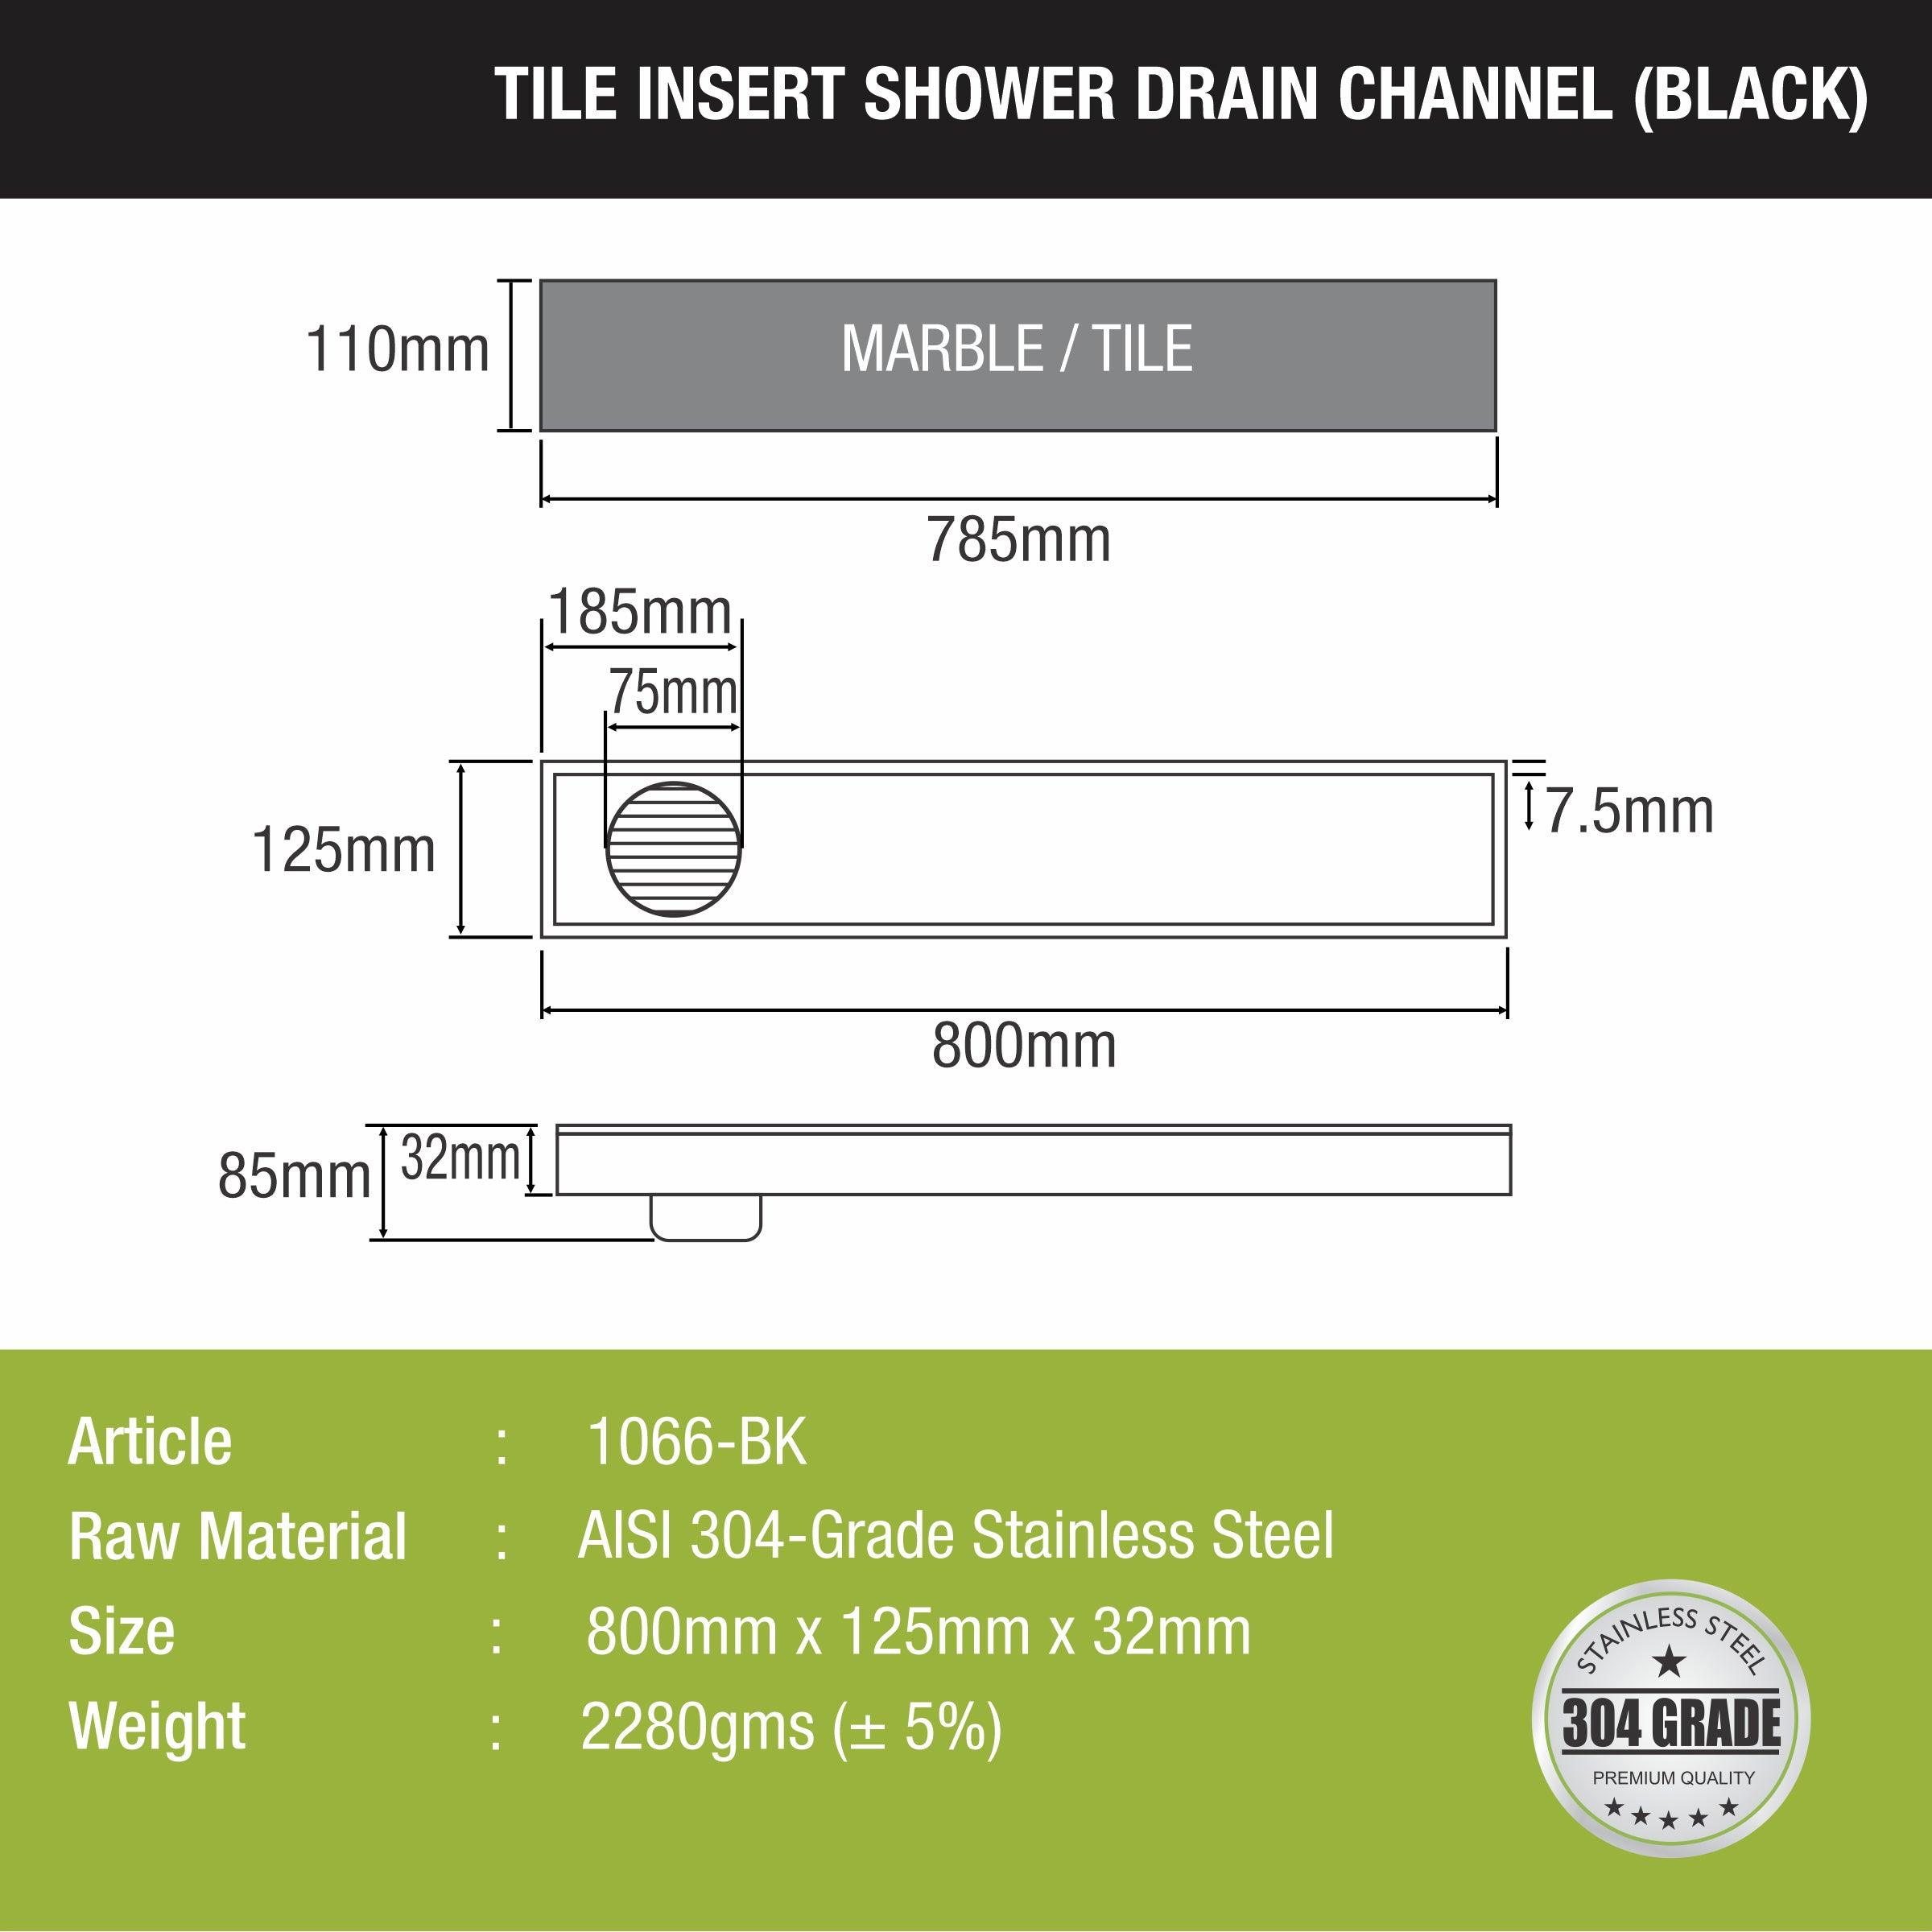 Tile Insert Shower Drain Channel - Black (32 x 5 Inches) size and measurement